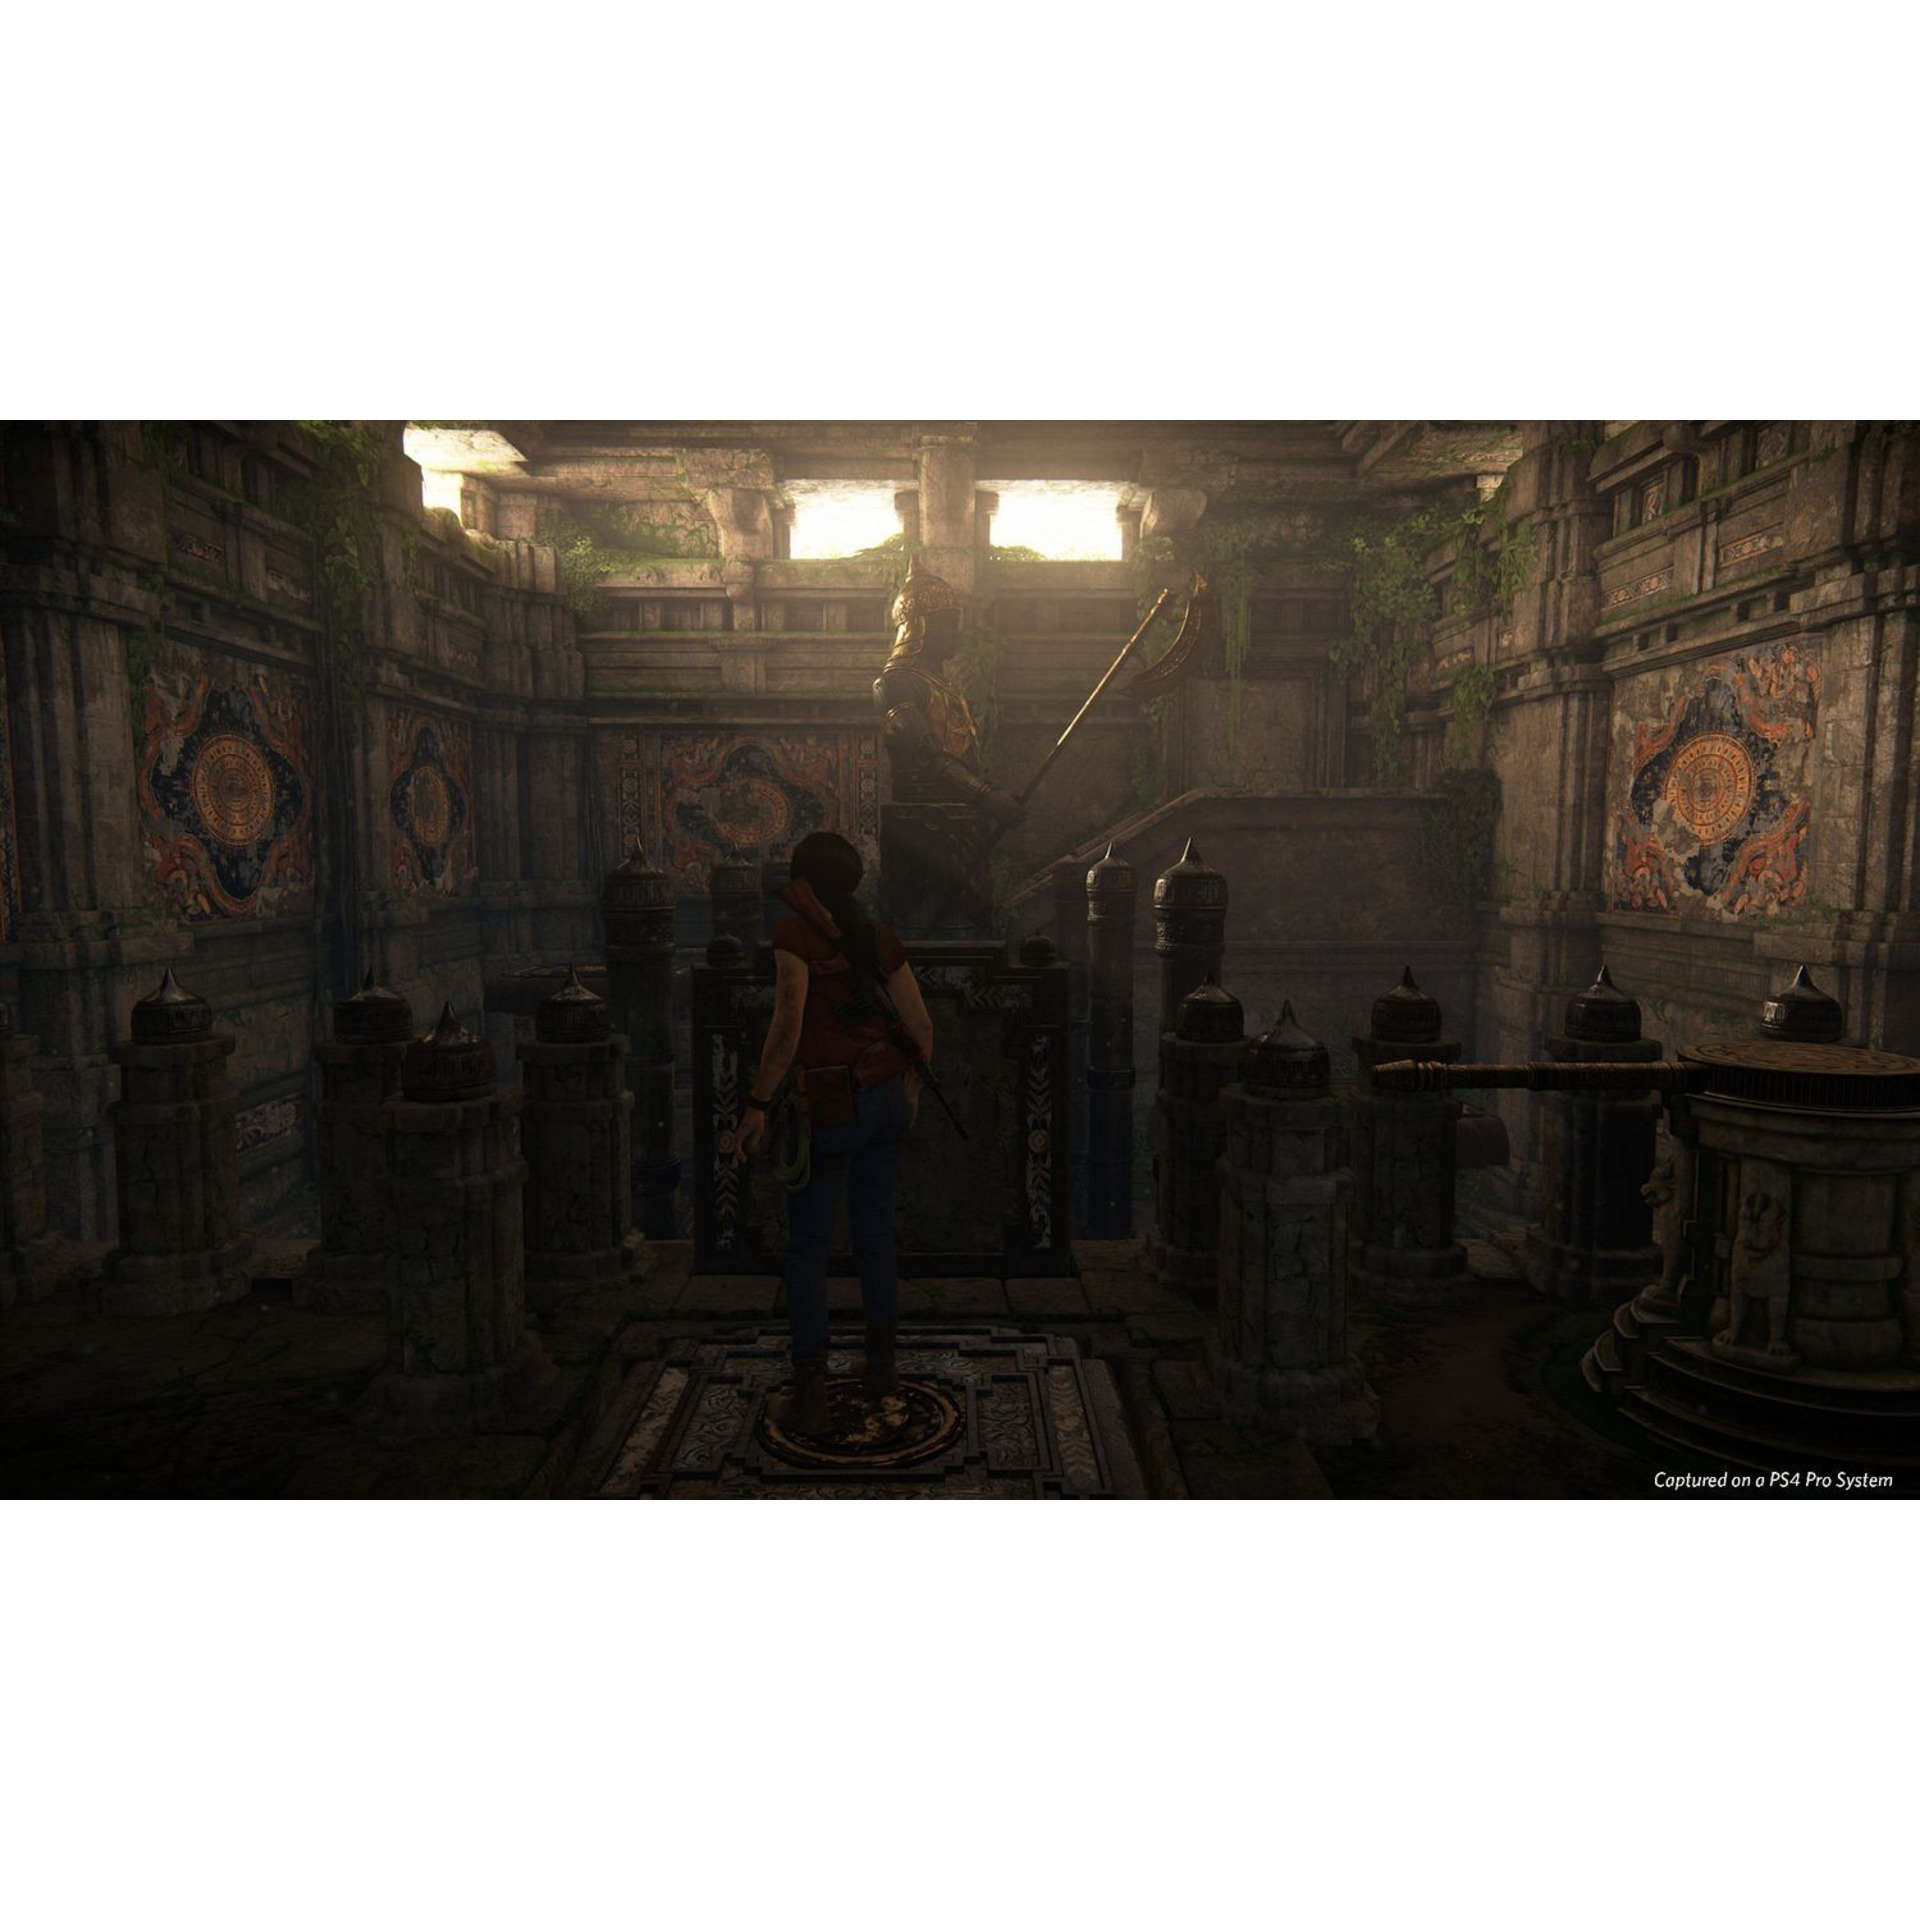 Игра PlayStation 4 Uncharted The Lost Legacy /HITS/